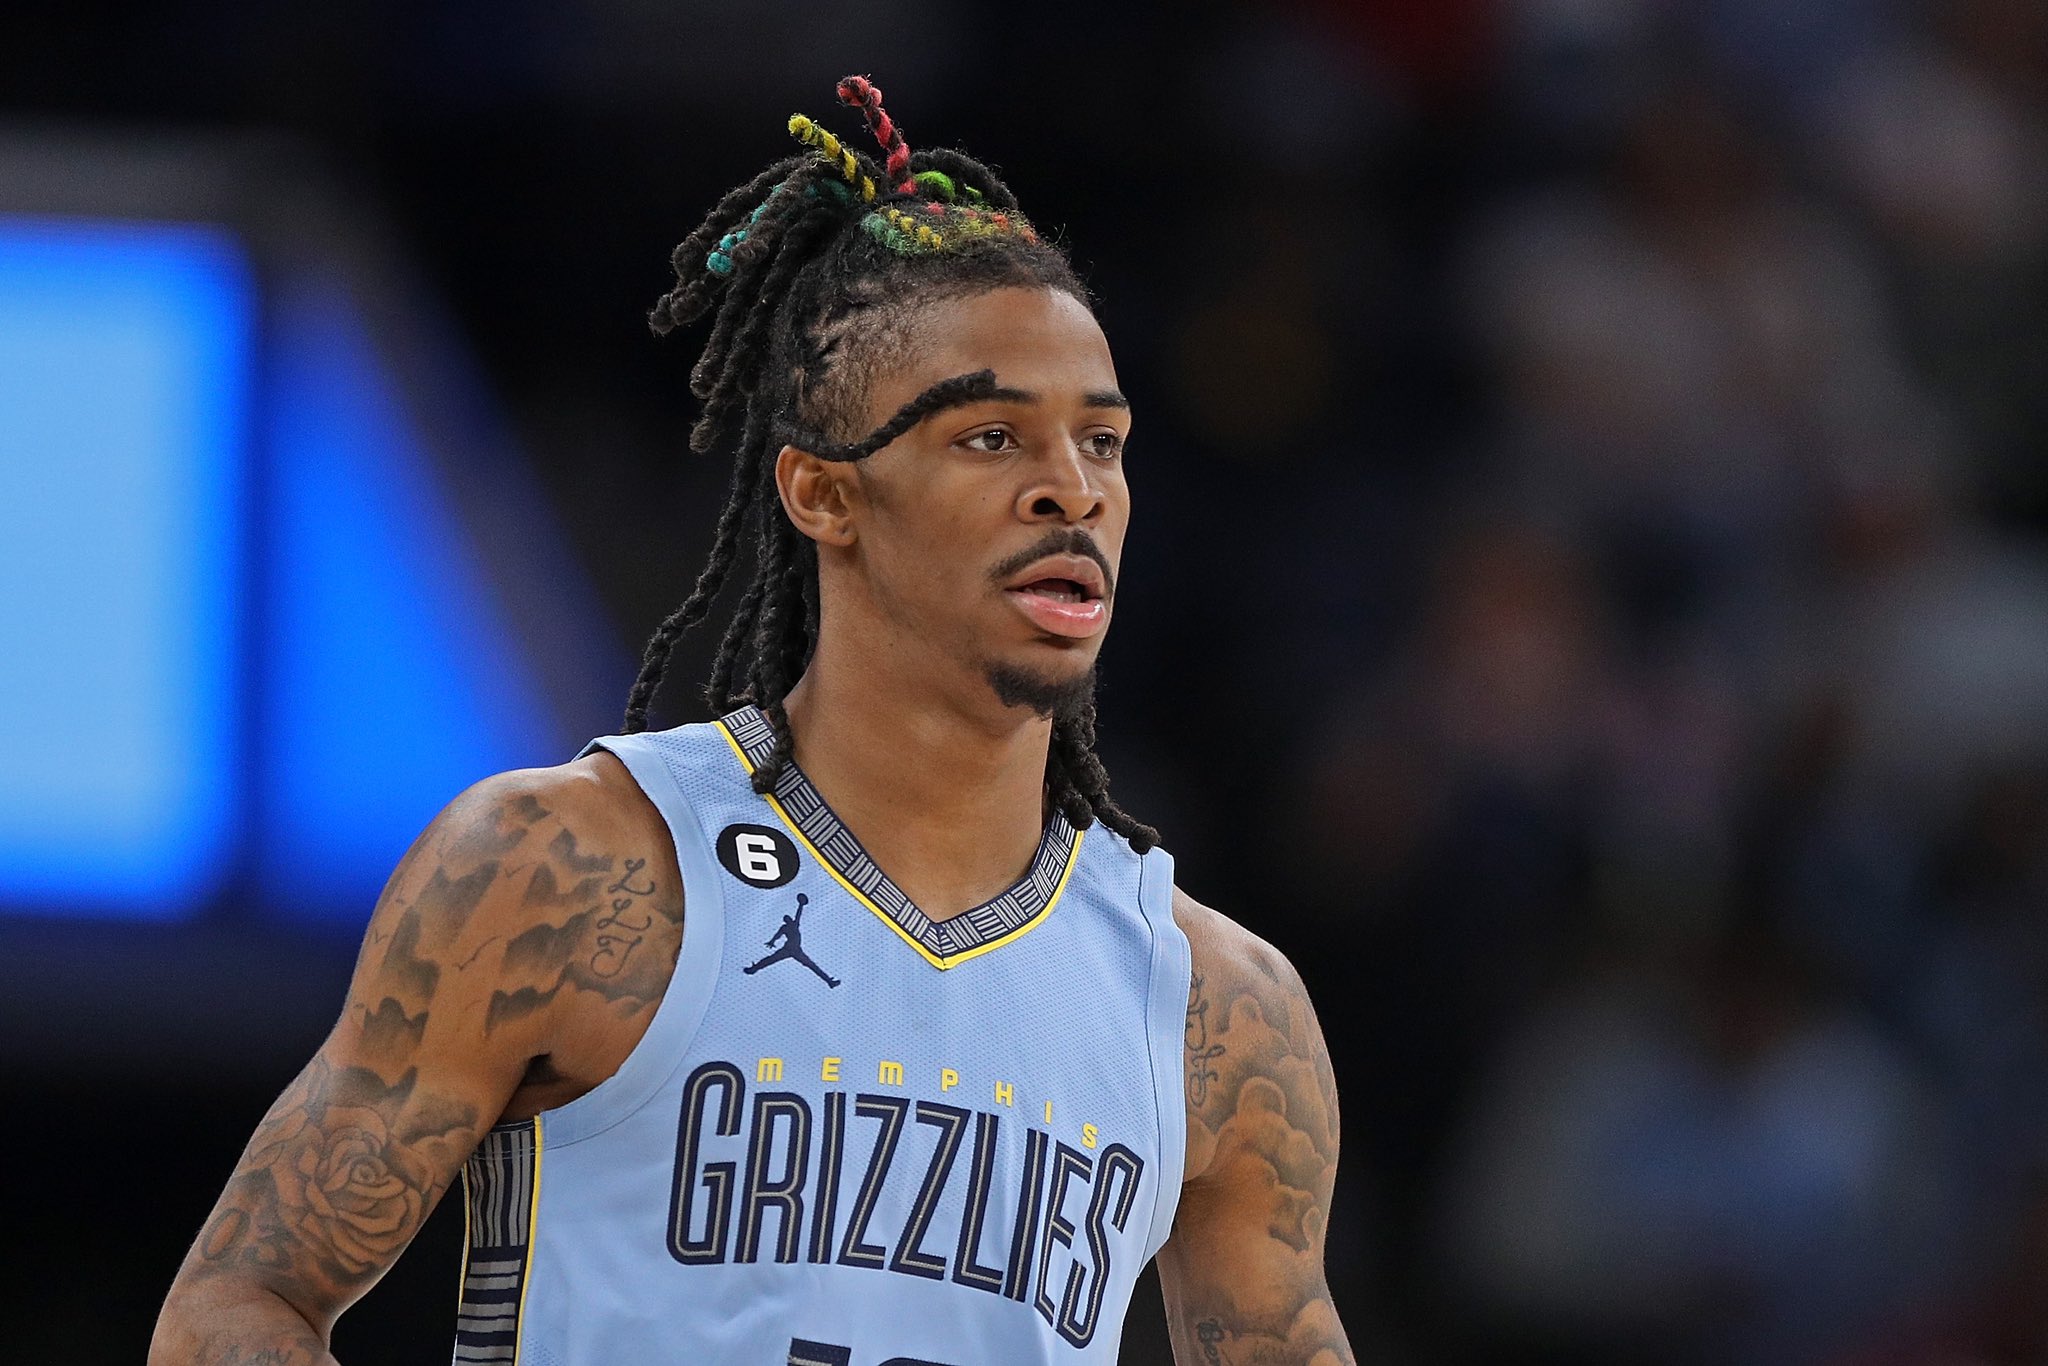 Ja Morant Sneakers Removed From Nike App, Website After 2nd Gun Incident